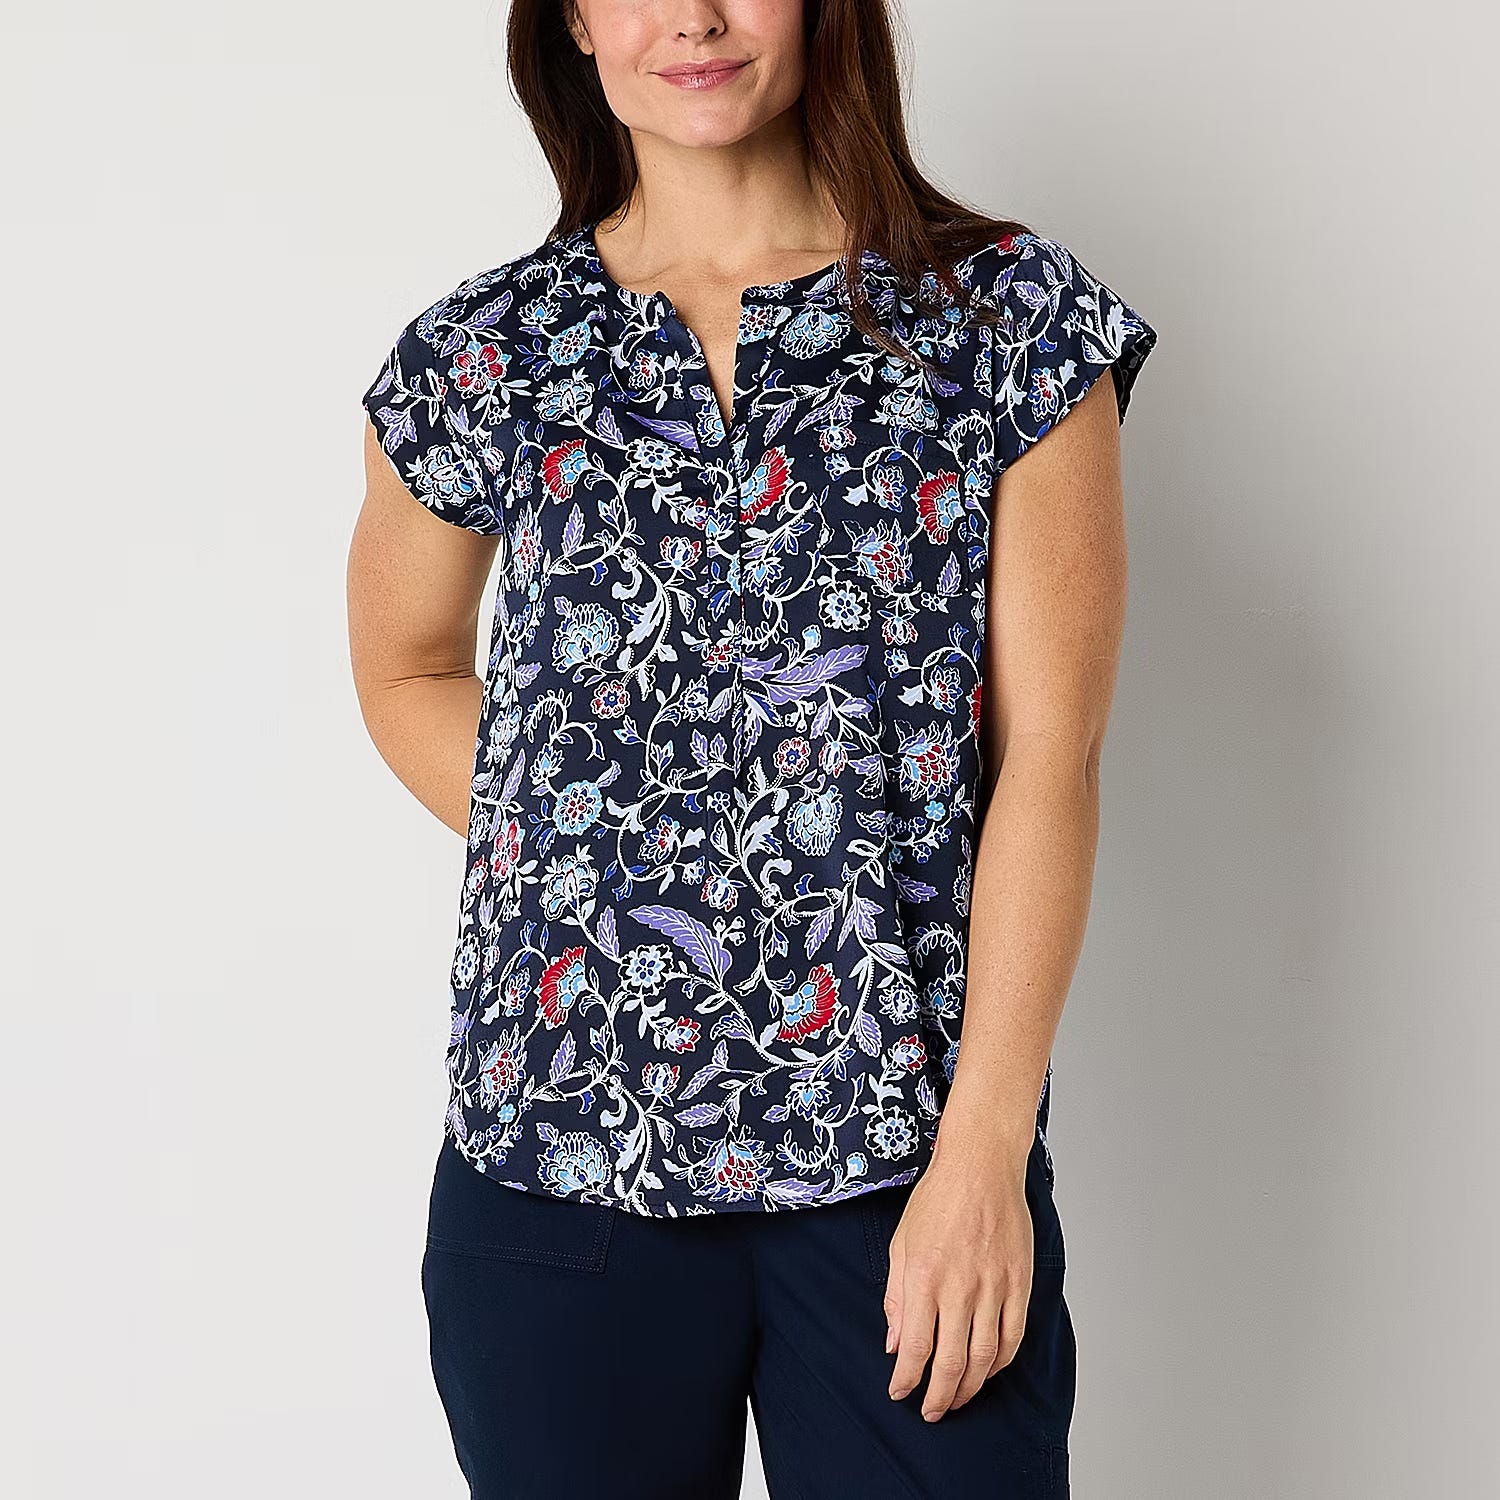 A woman is wearing a navy blue printed scrub top with a V-neck and short sleeves.